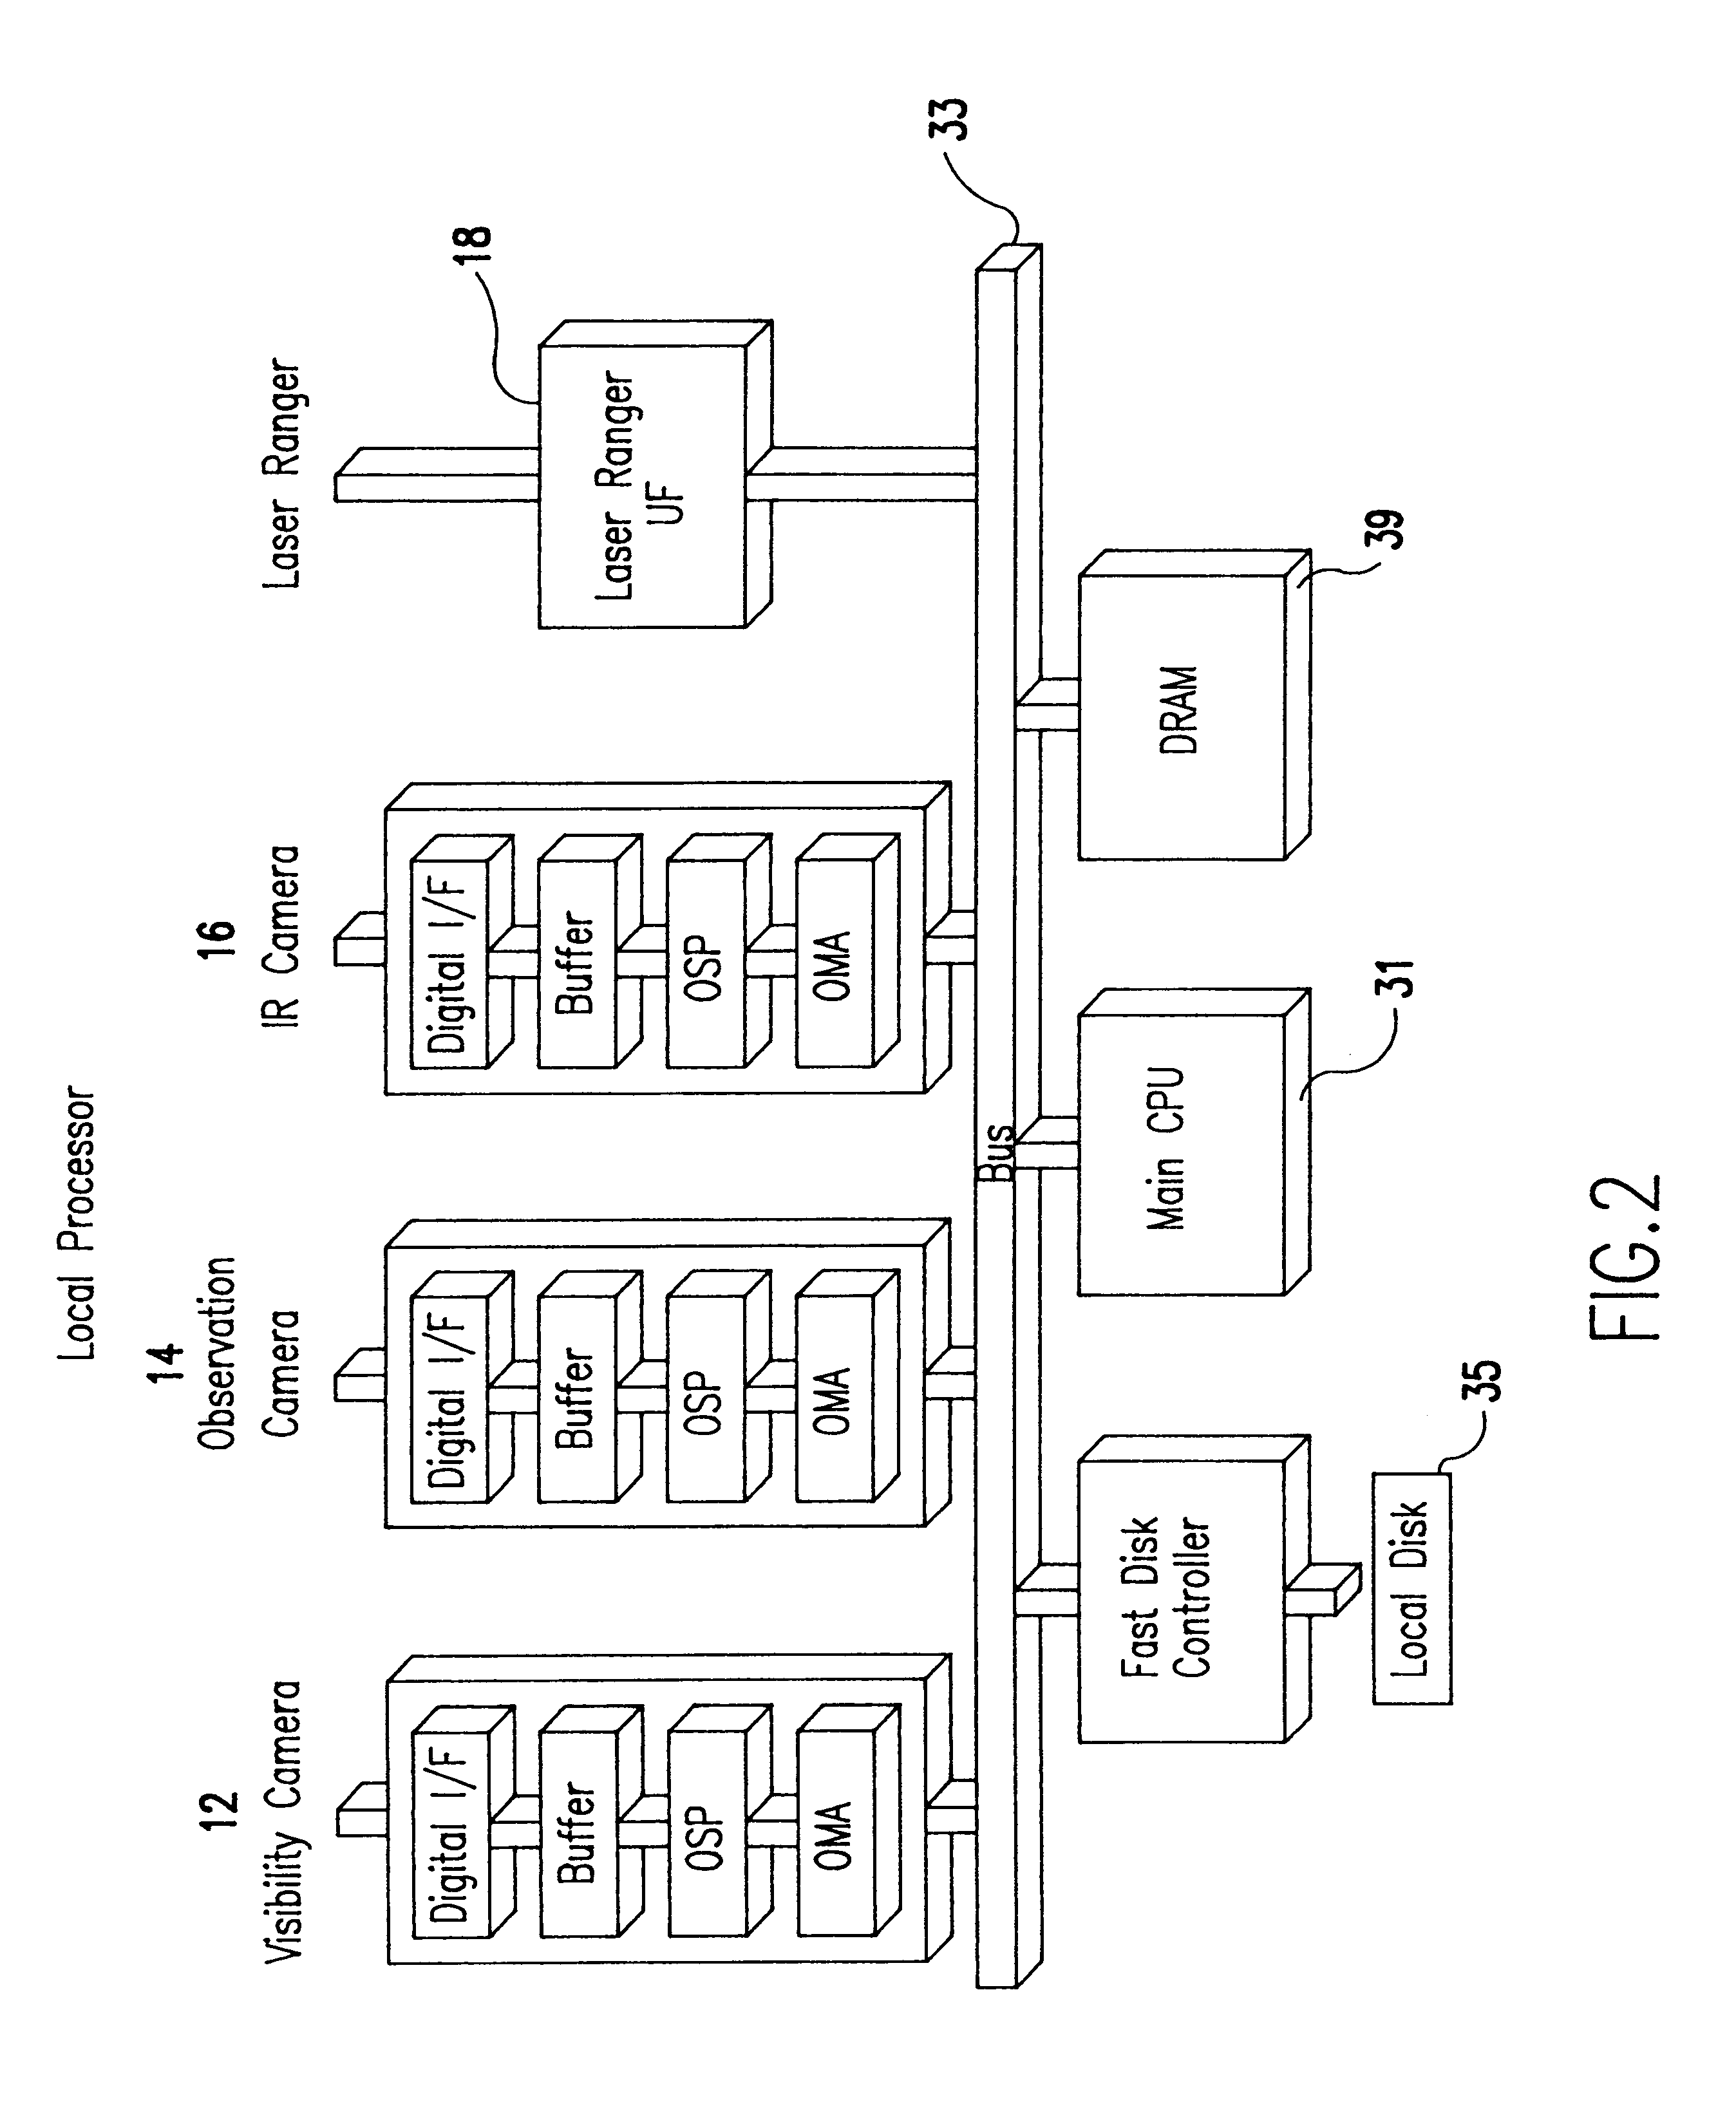 Apparatus and method for monitoring and reporting weather conditions